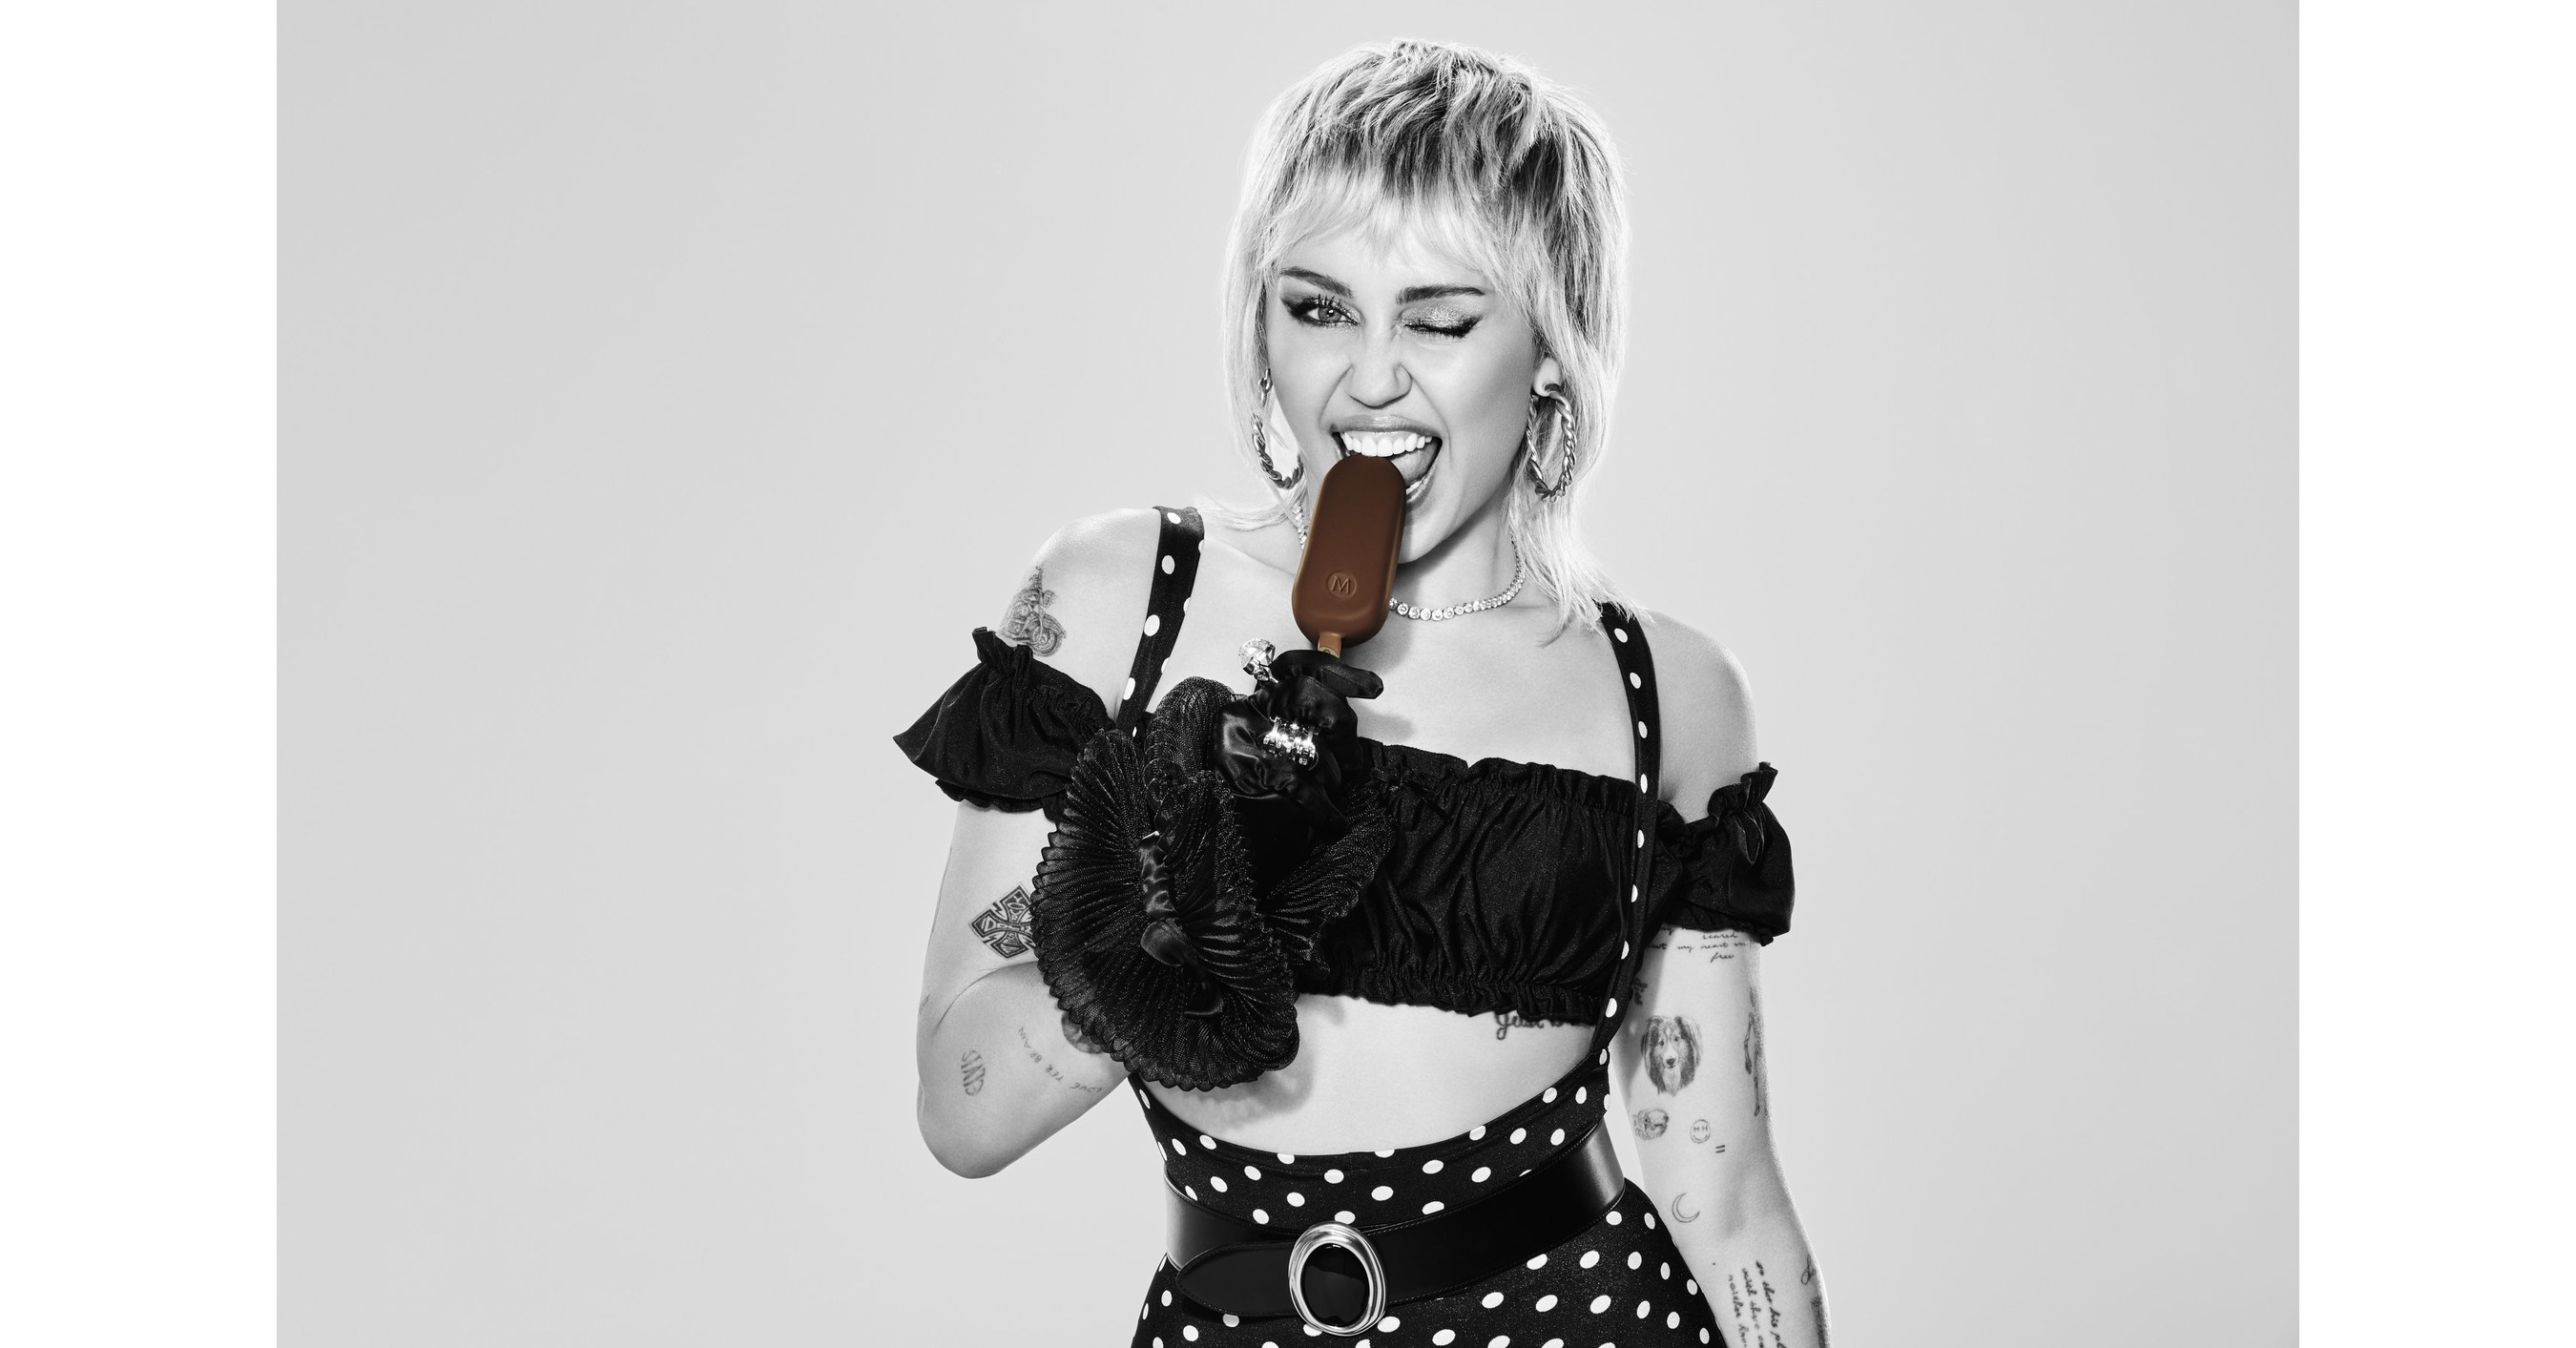 Miley Cyrus Monochrome 2017 Wallpapers